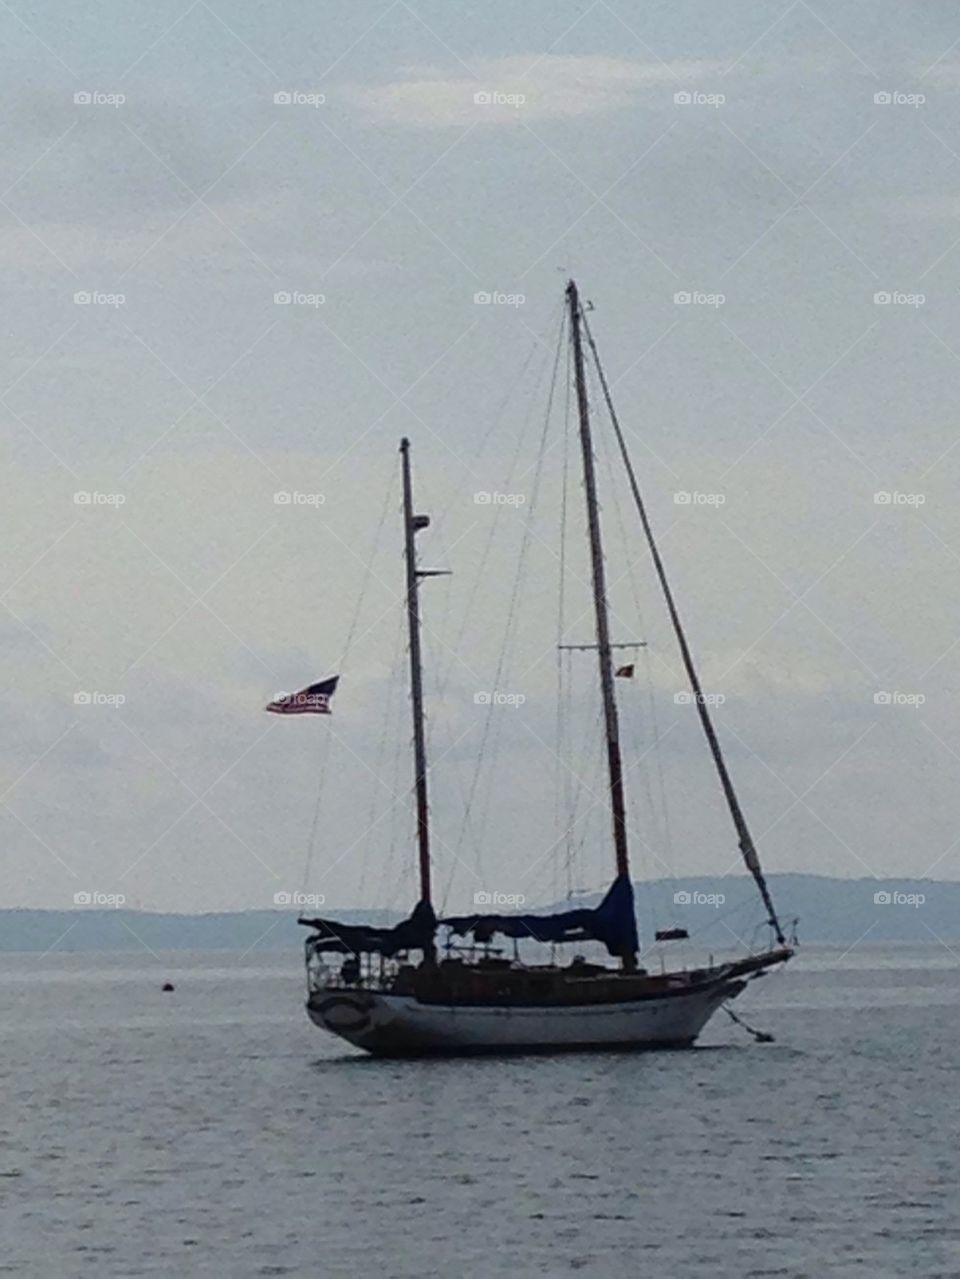 Sailboat on a cloudy day